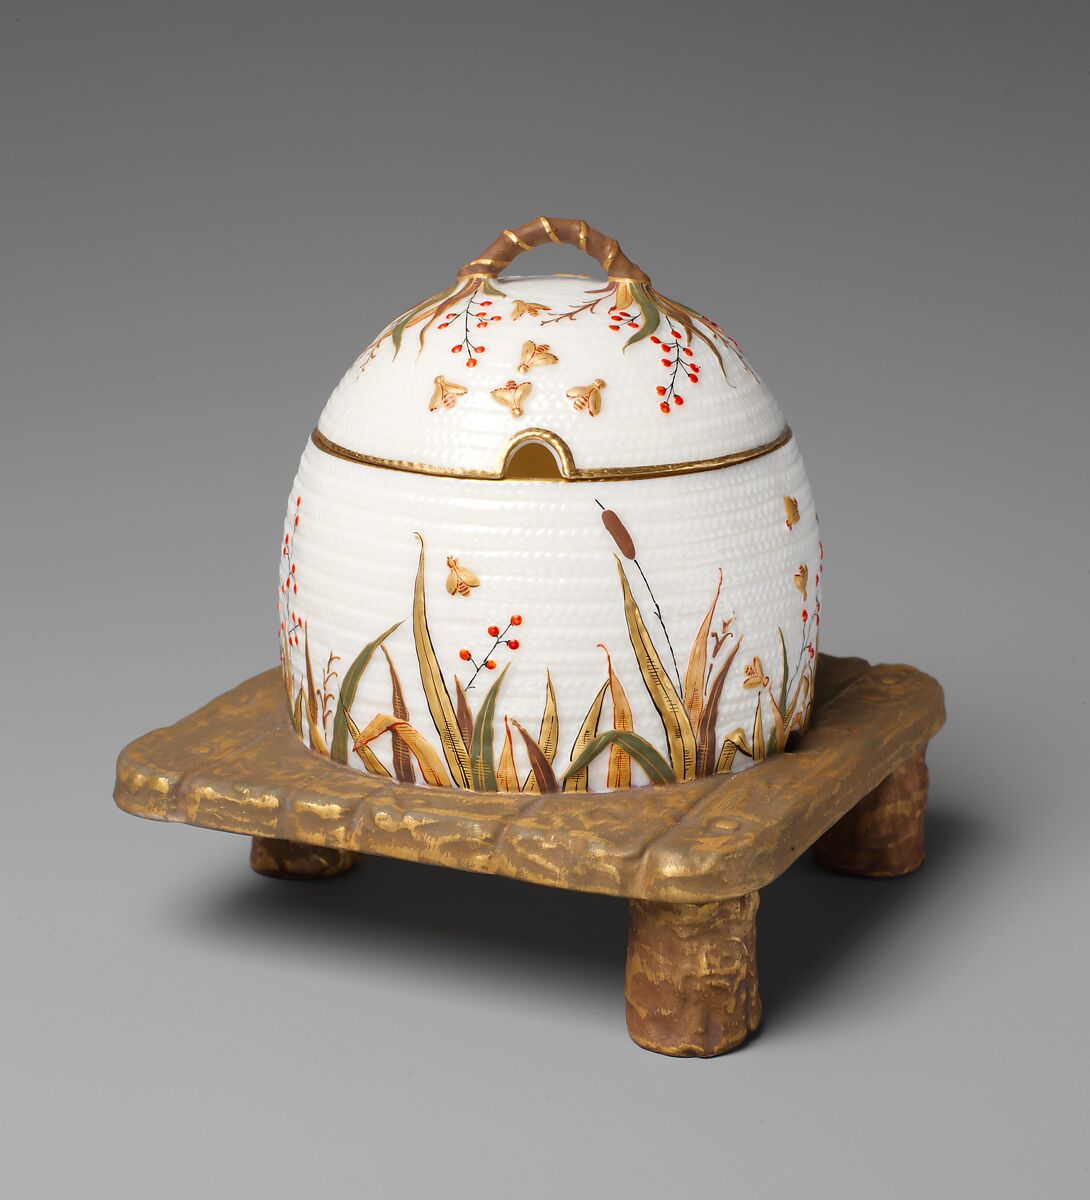 Covered honey pot, Manufactured by Ott and Brewer (American, Trenton, New Jersey, 1871–1893), Porcelain, American 